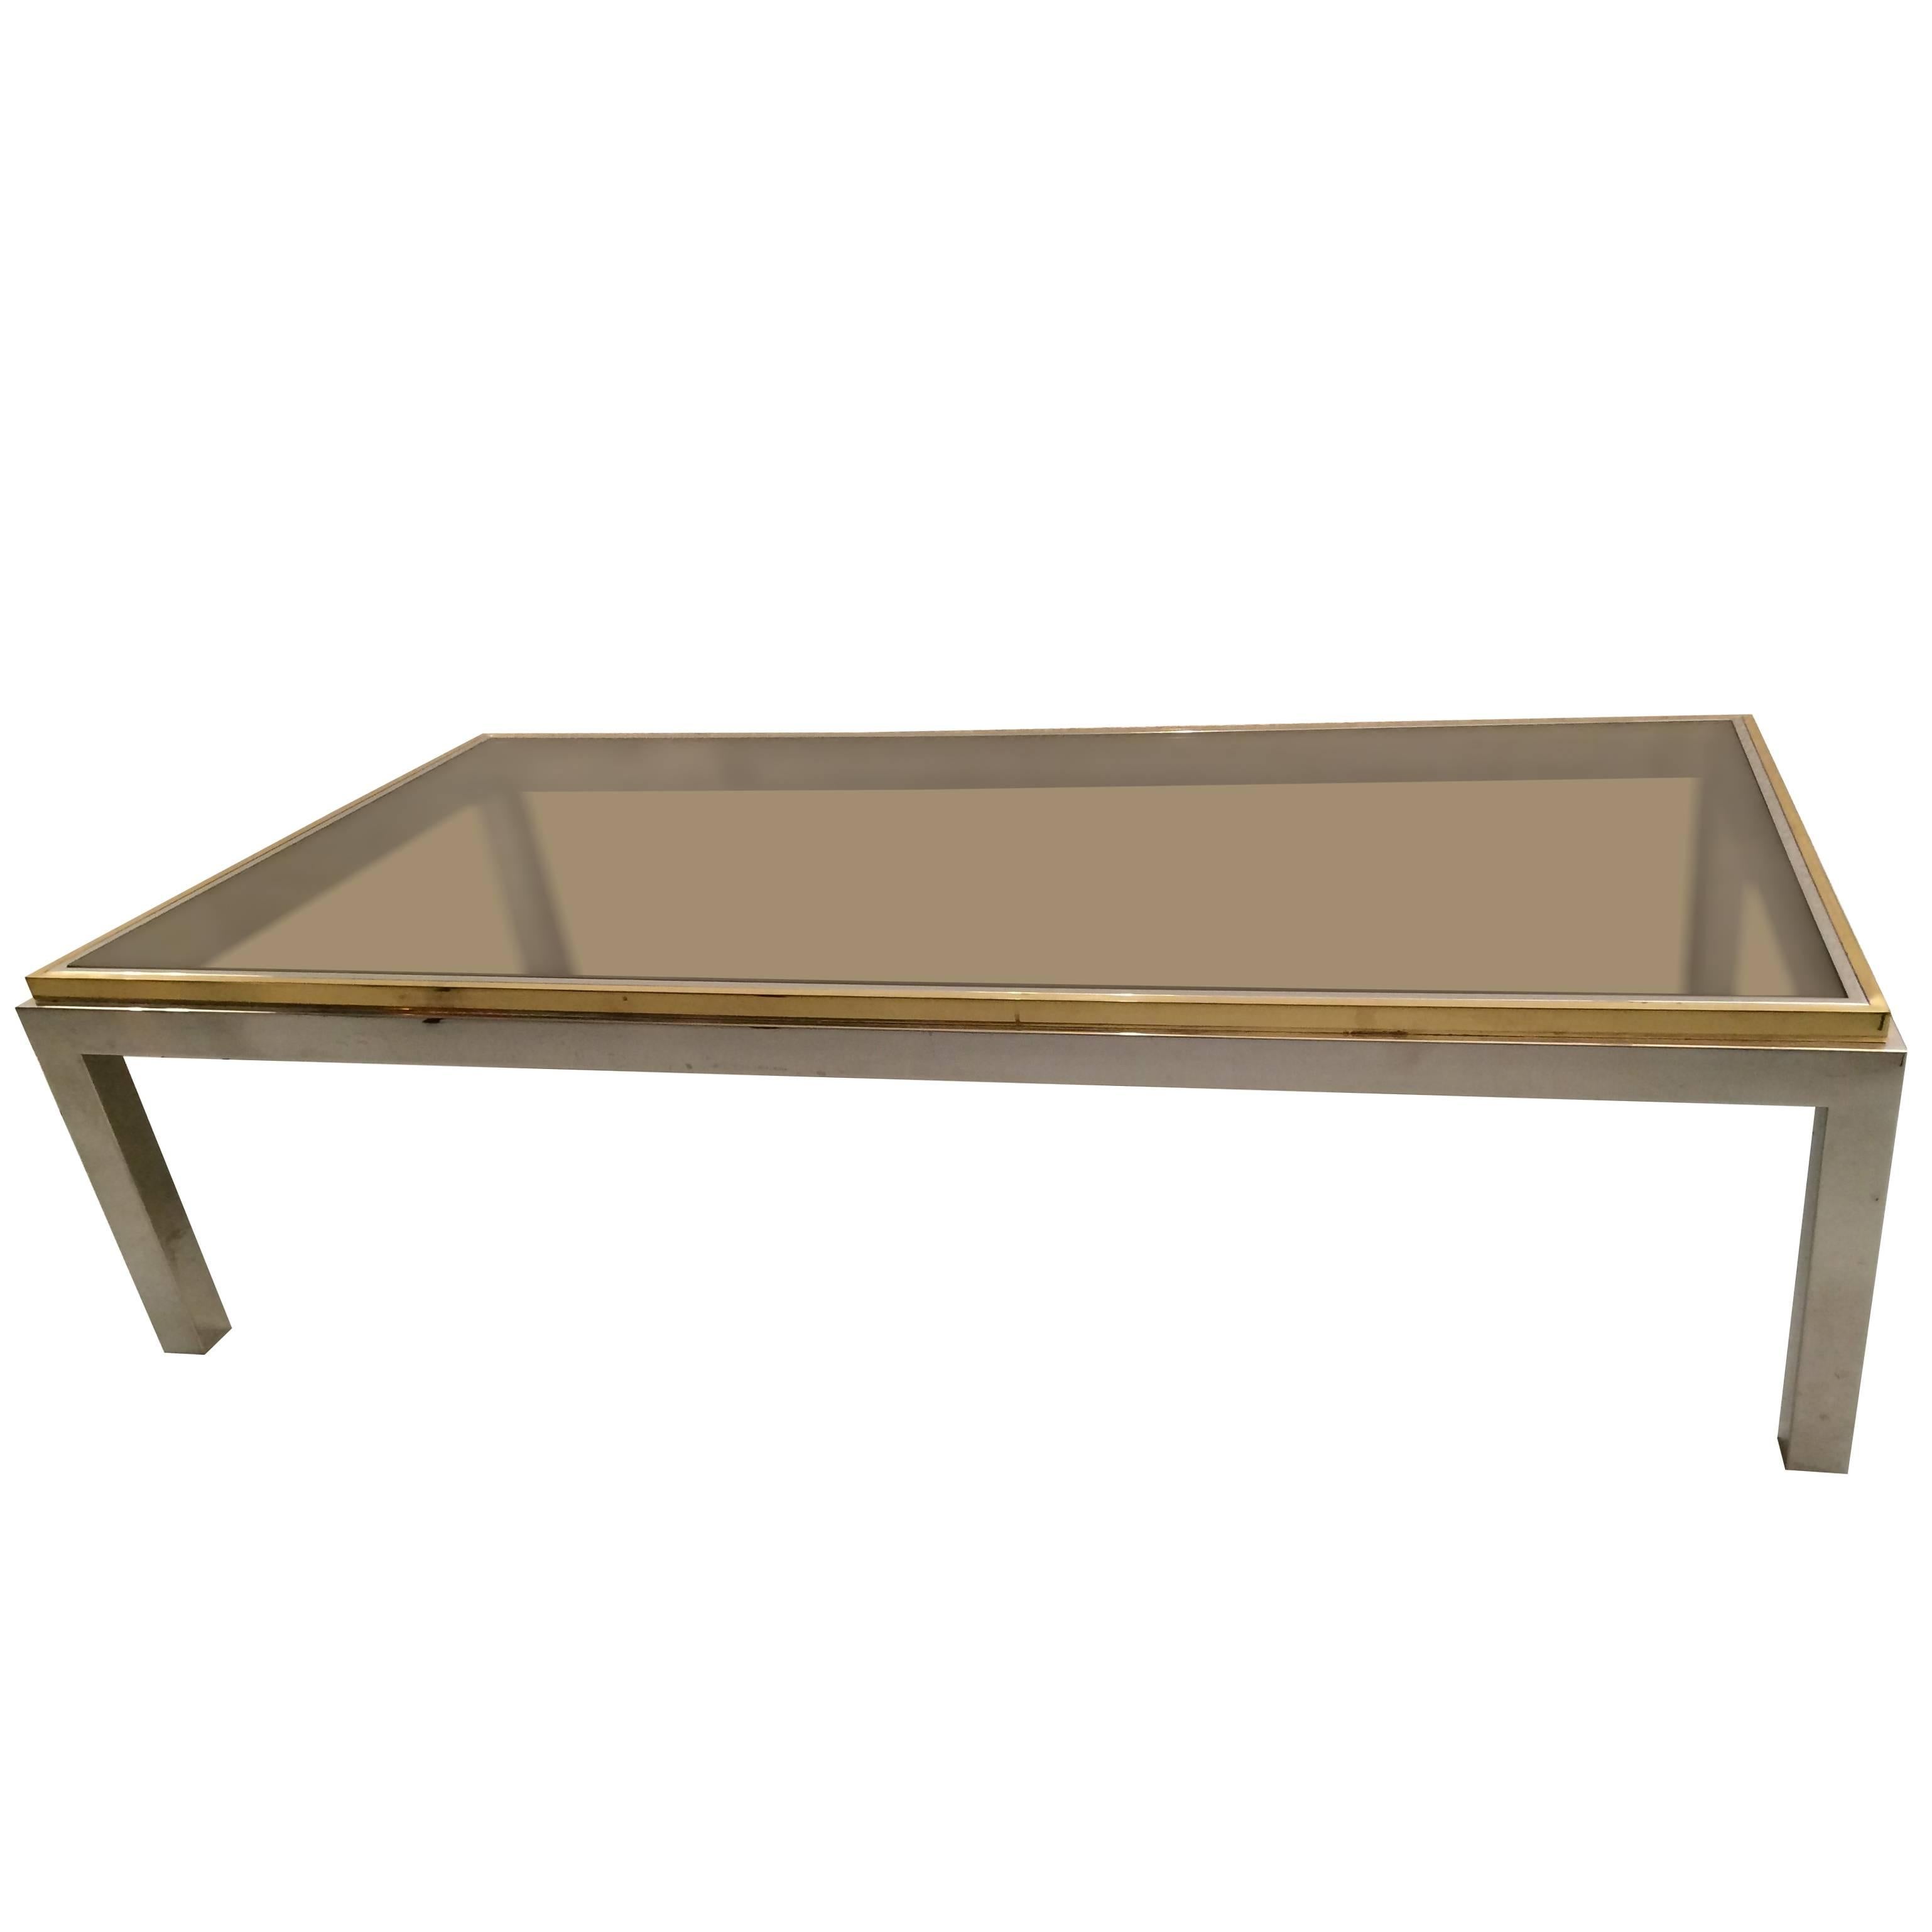 "Flaminia" Coffee Table by Willy Rizzo